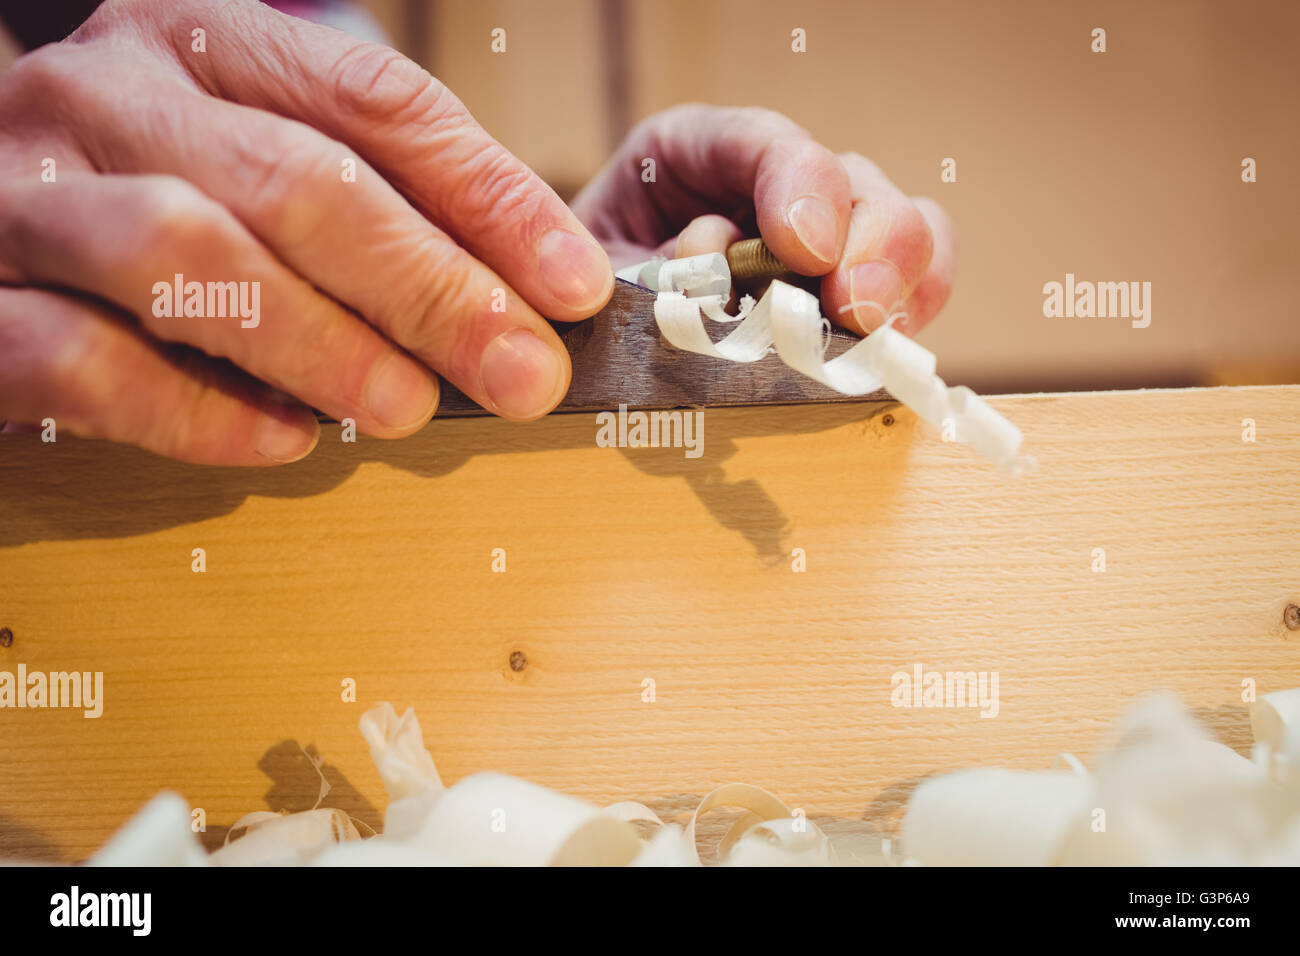 Close-up of wood shavings being pulled out Stock Photo